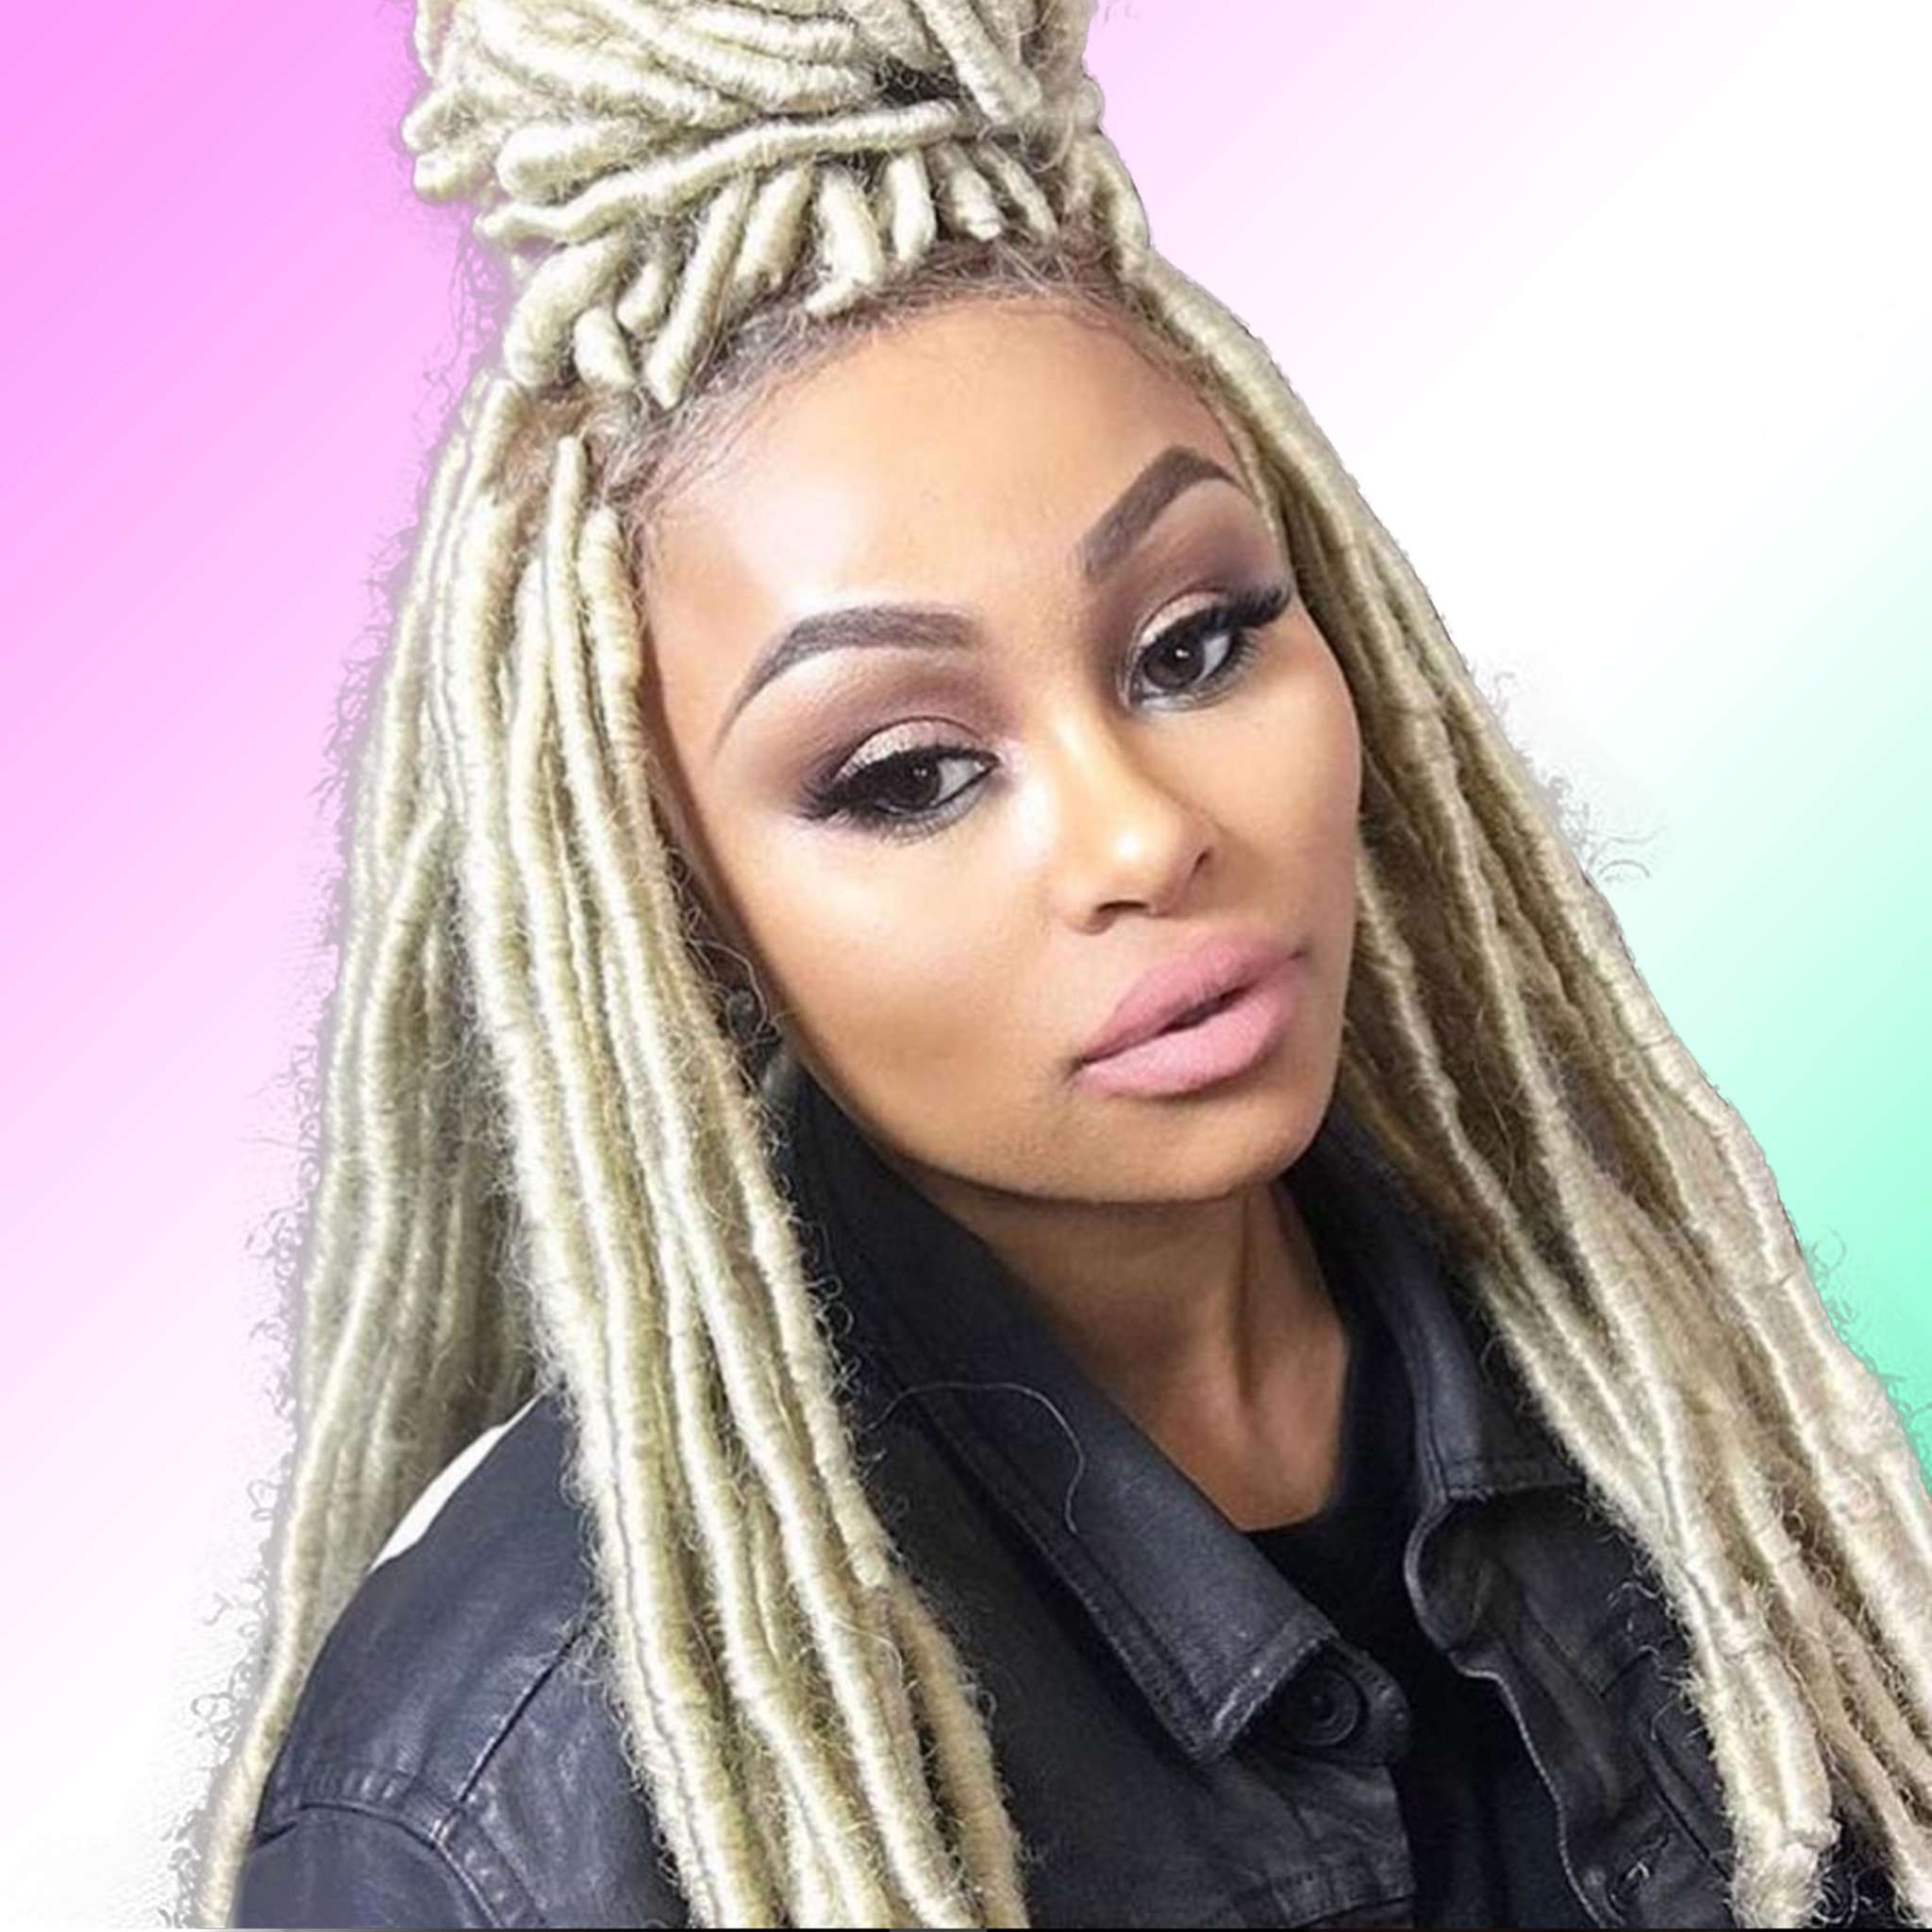 Blac Chyna Shows Off Her No-Makeup Face And Shares Her Secret For Looking Flawless